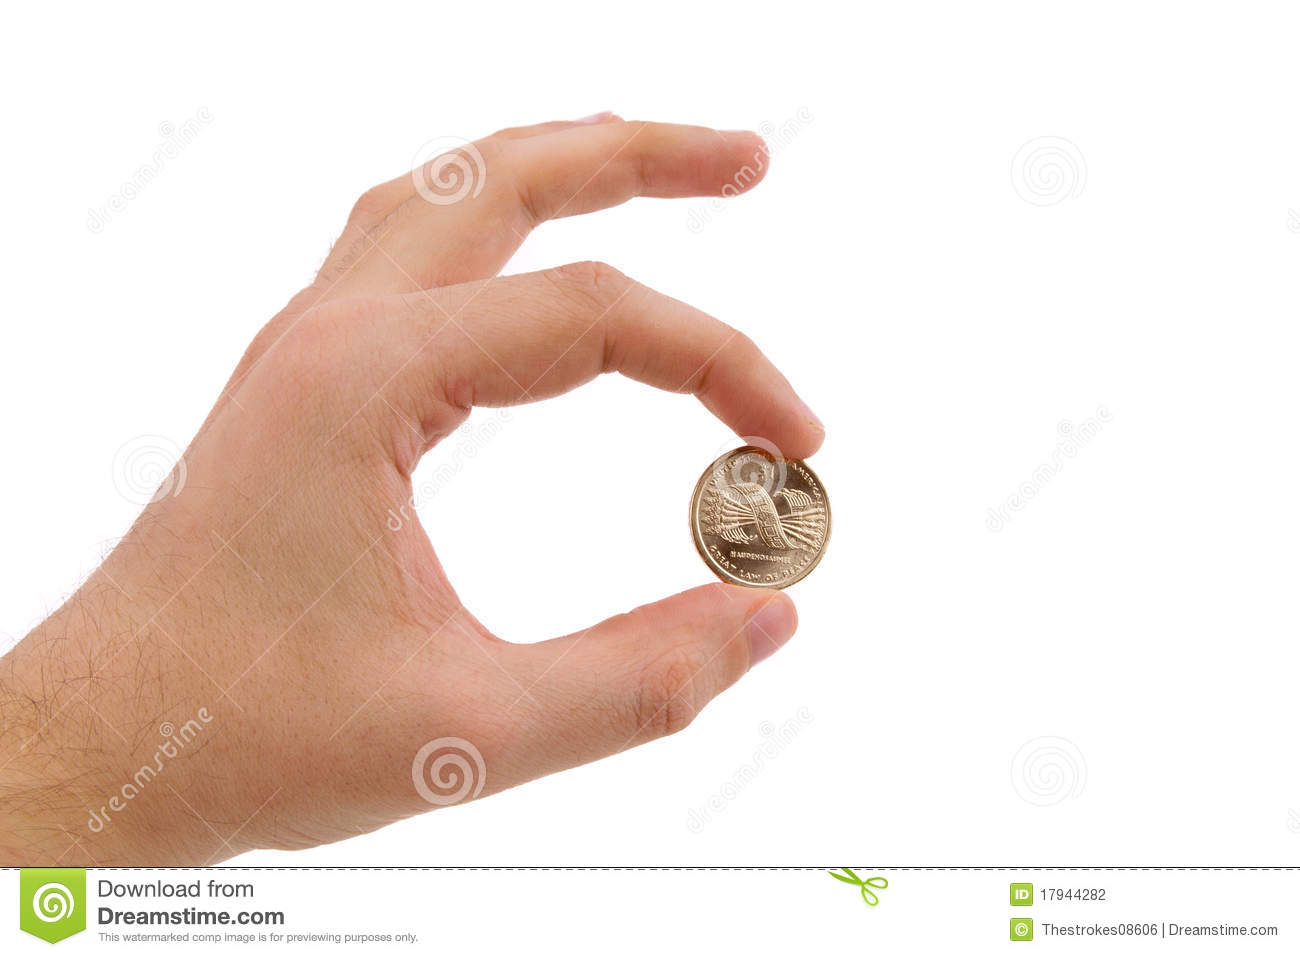 hand-holding-gold-coin-fingers-17944282 copy.jpg